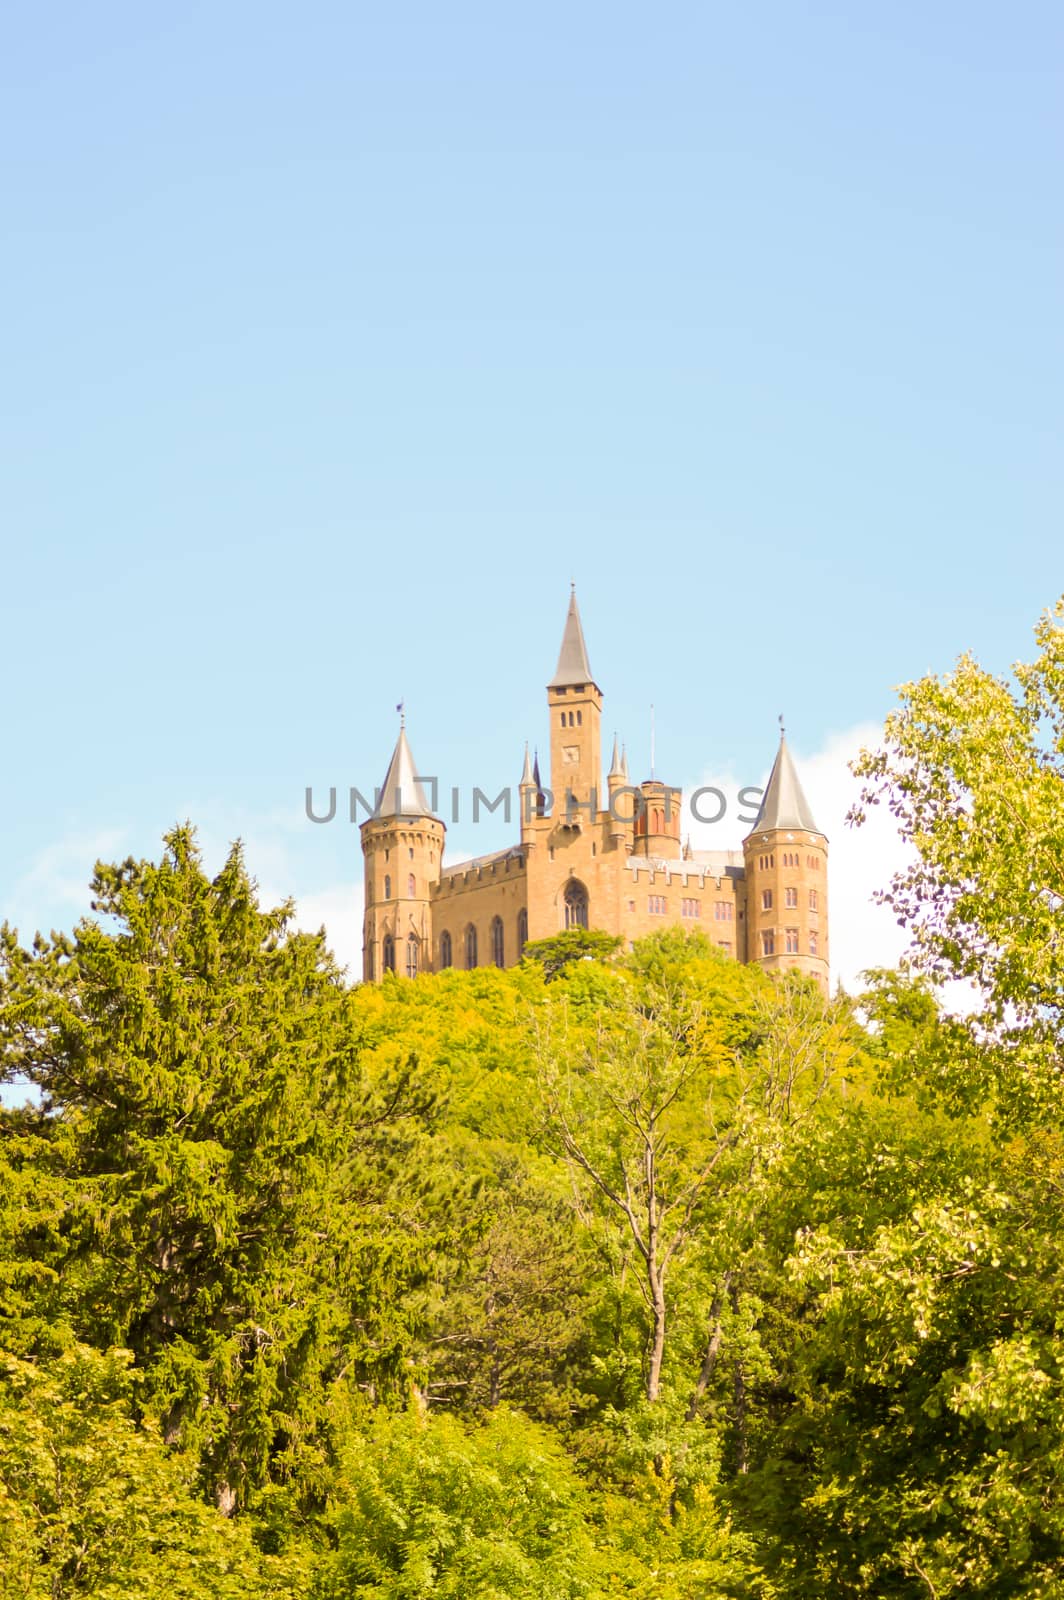 View of the castle of Hohenzollern in the municipality of bisingen in the state of Baden-Württemberg in German